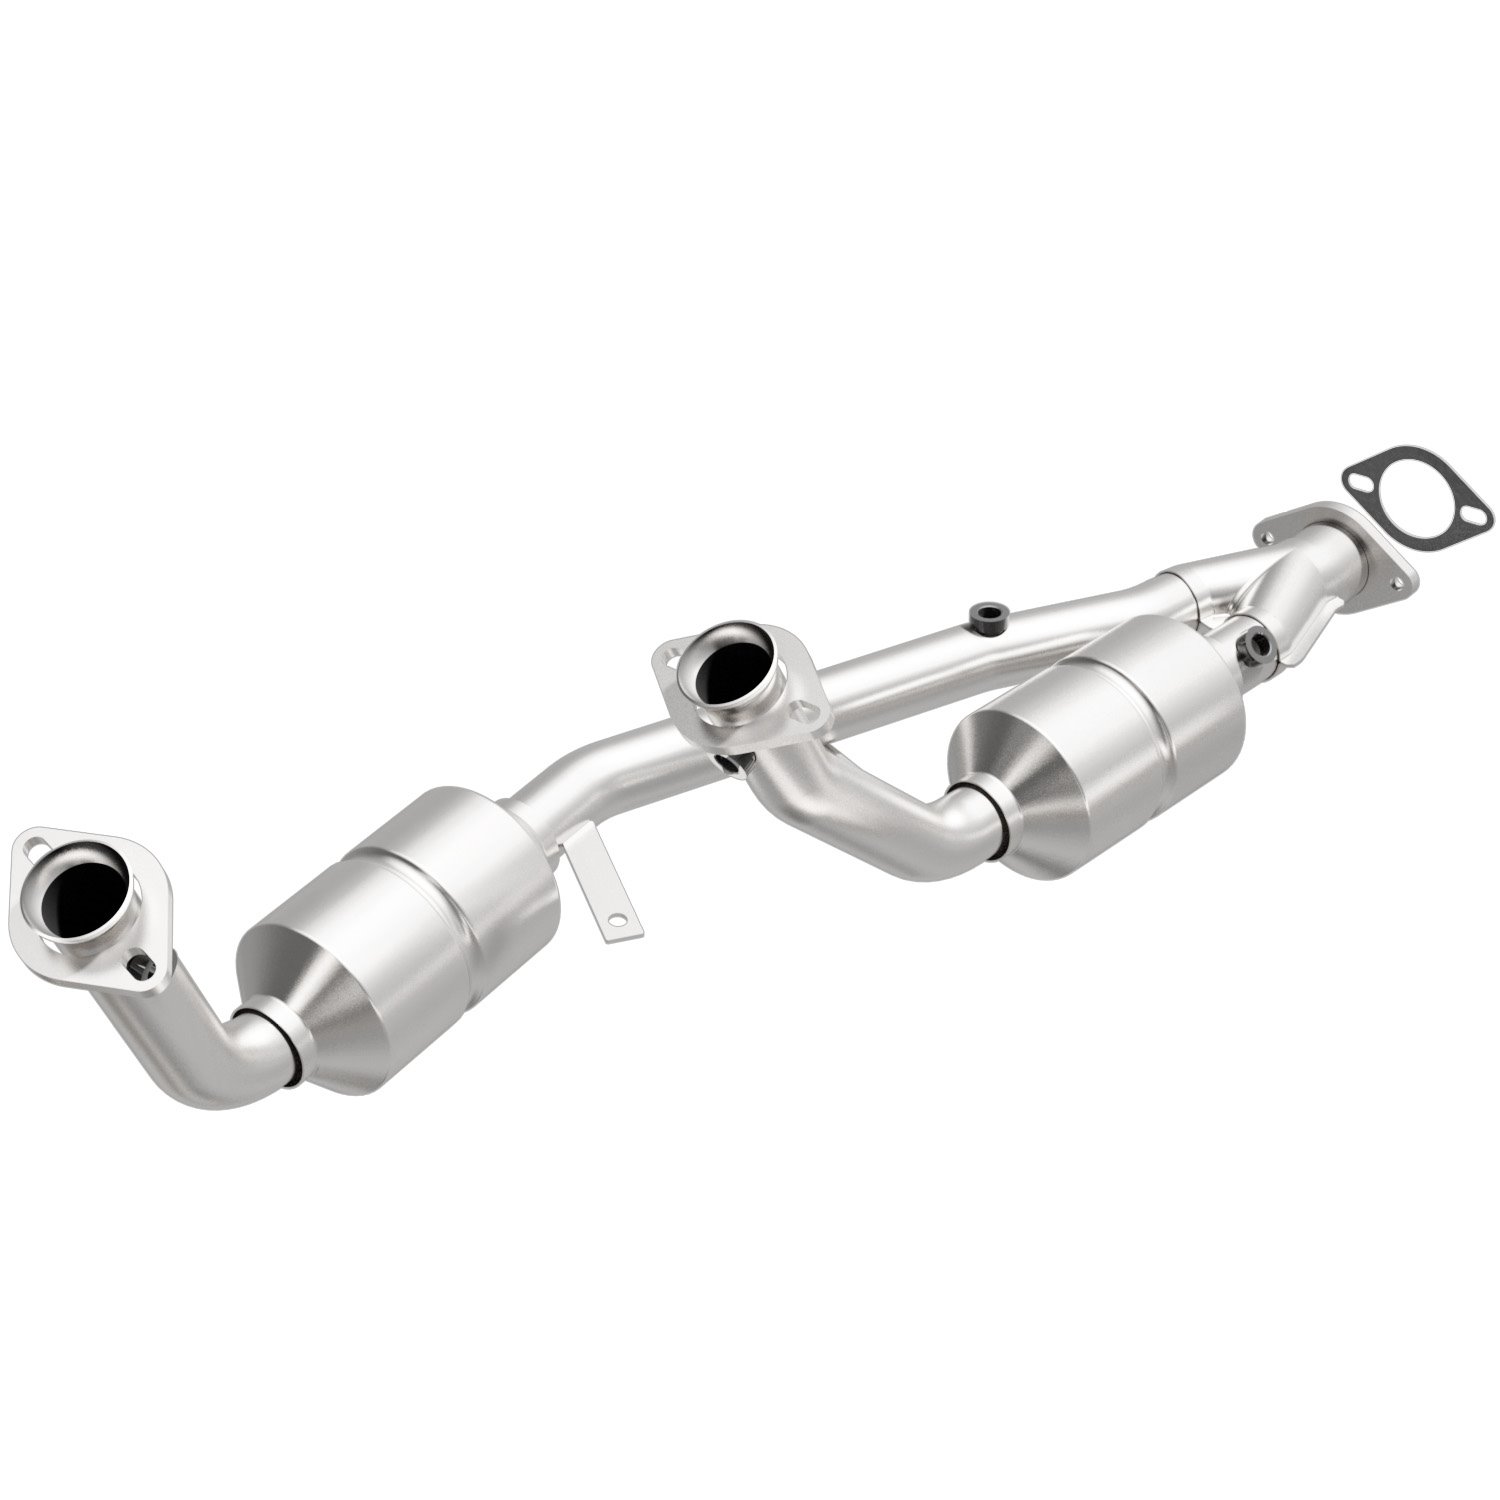 1998 Ford Windstar HM Grade Federal / EPA Compliant Direct-Fit Catalytic Converter